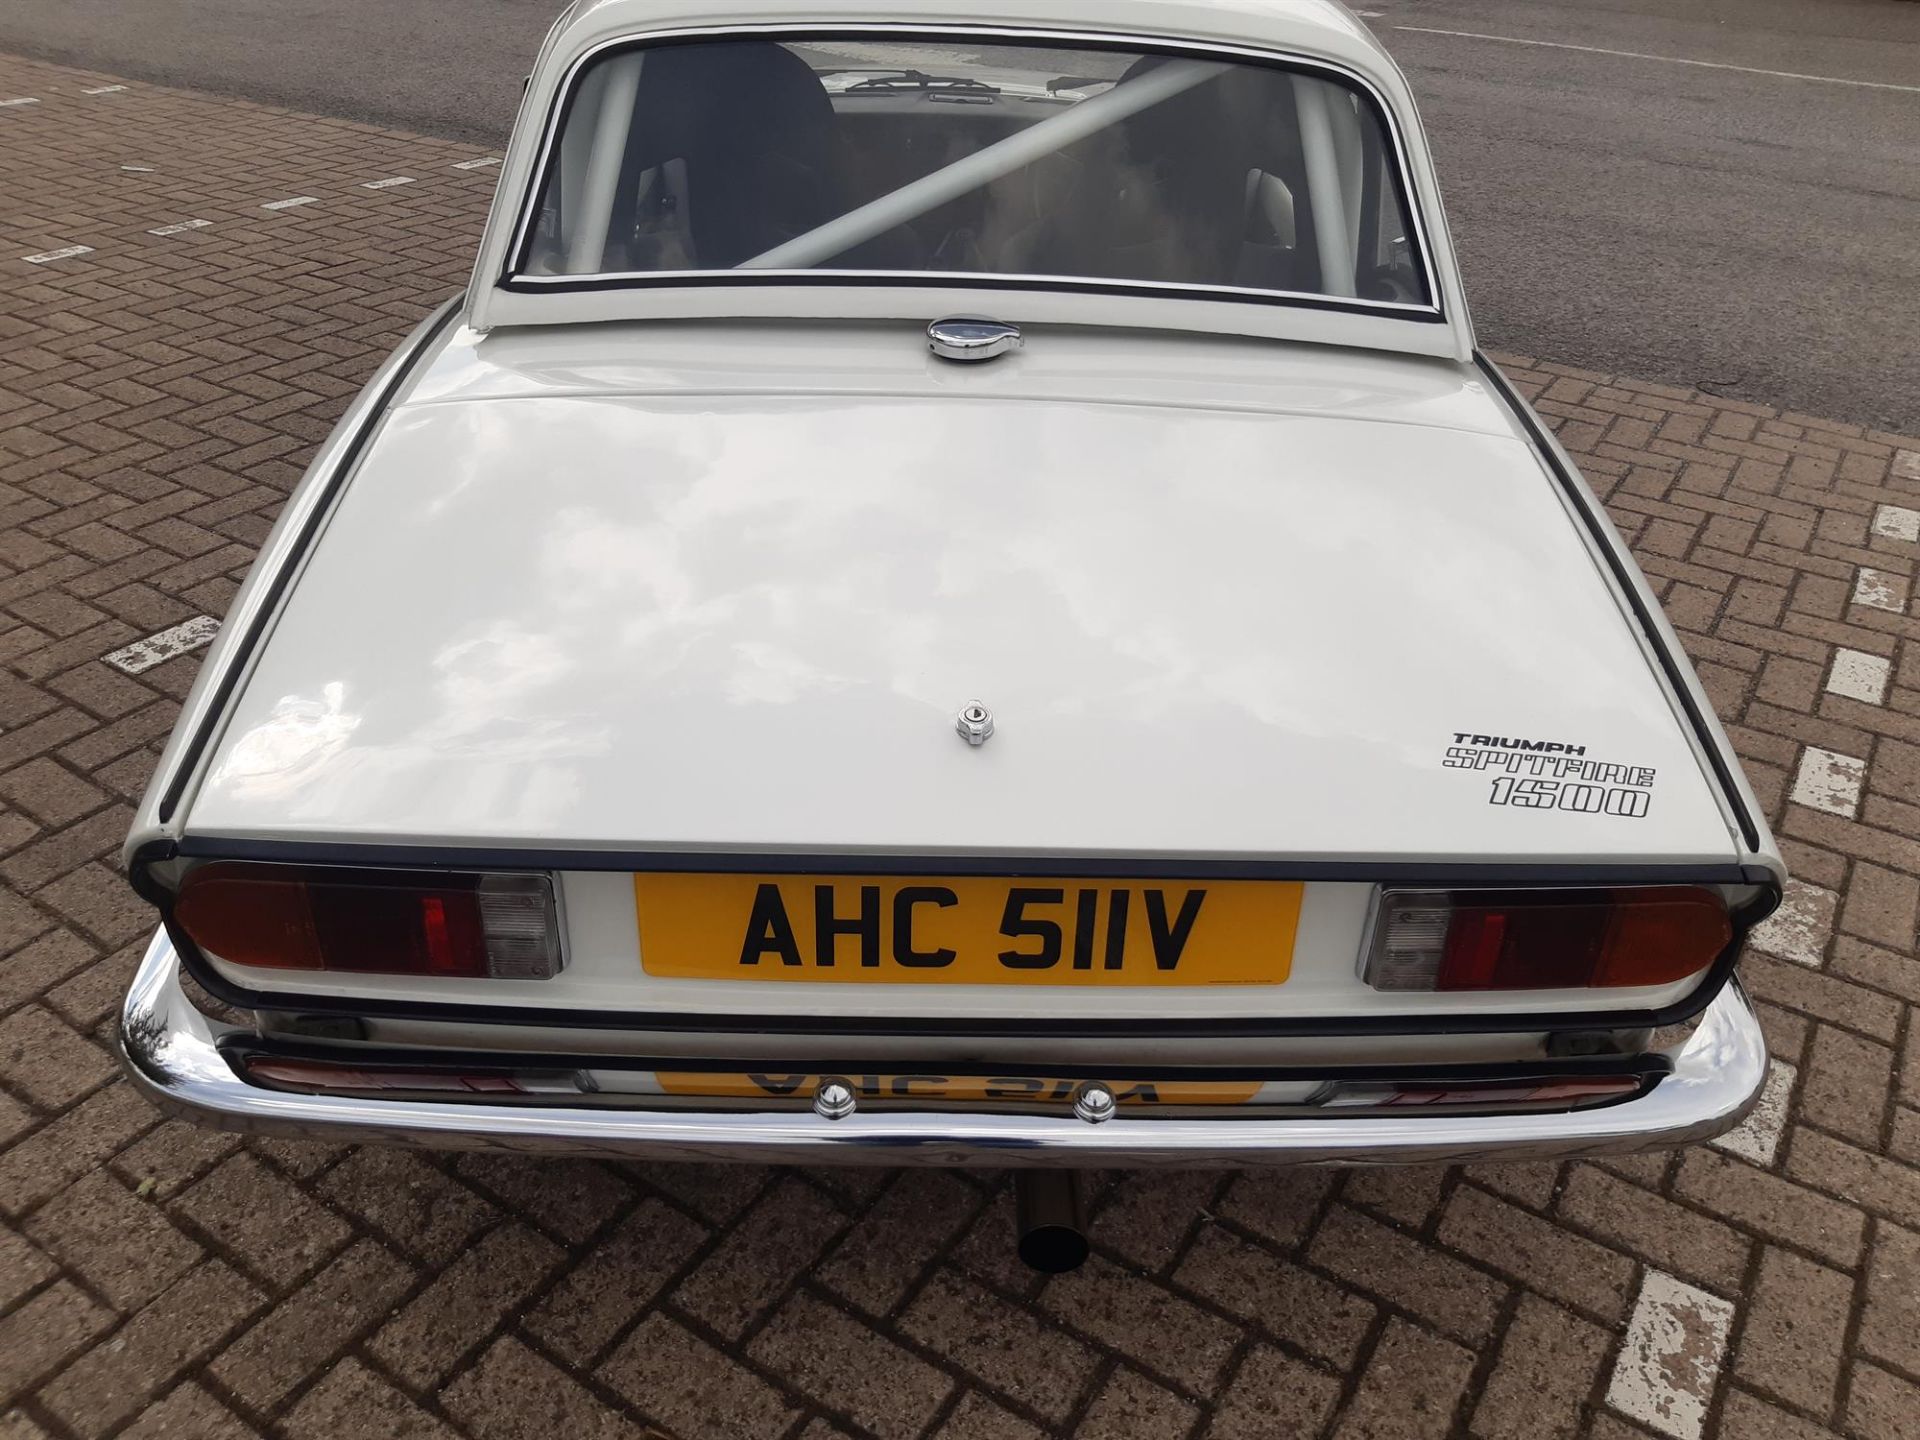 1980 Triumph Spitfire 1500 Fast Road Comvertible with Hardtop - Image 10 of 10